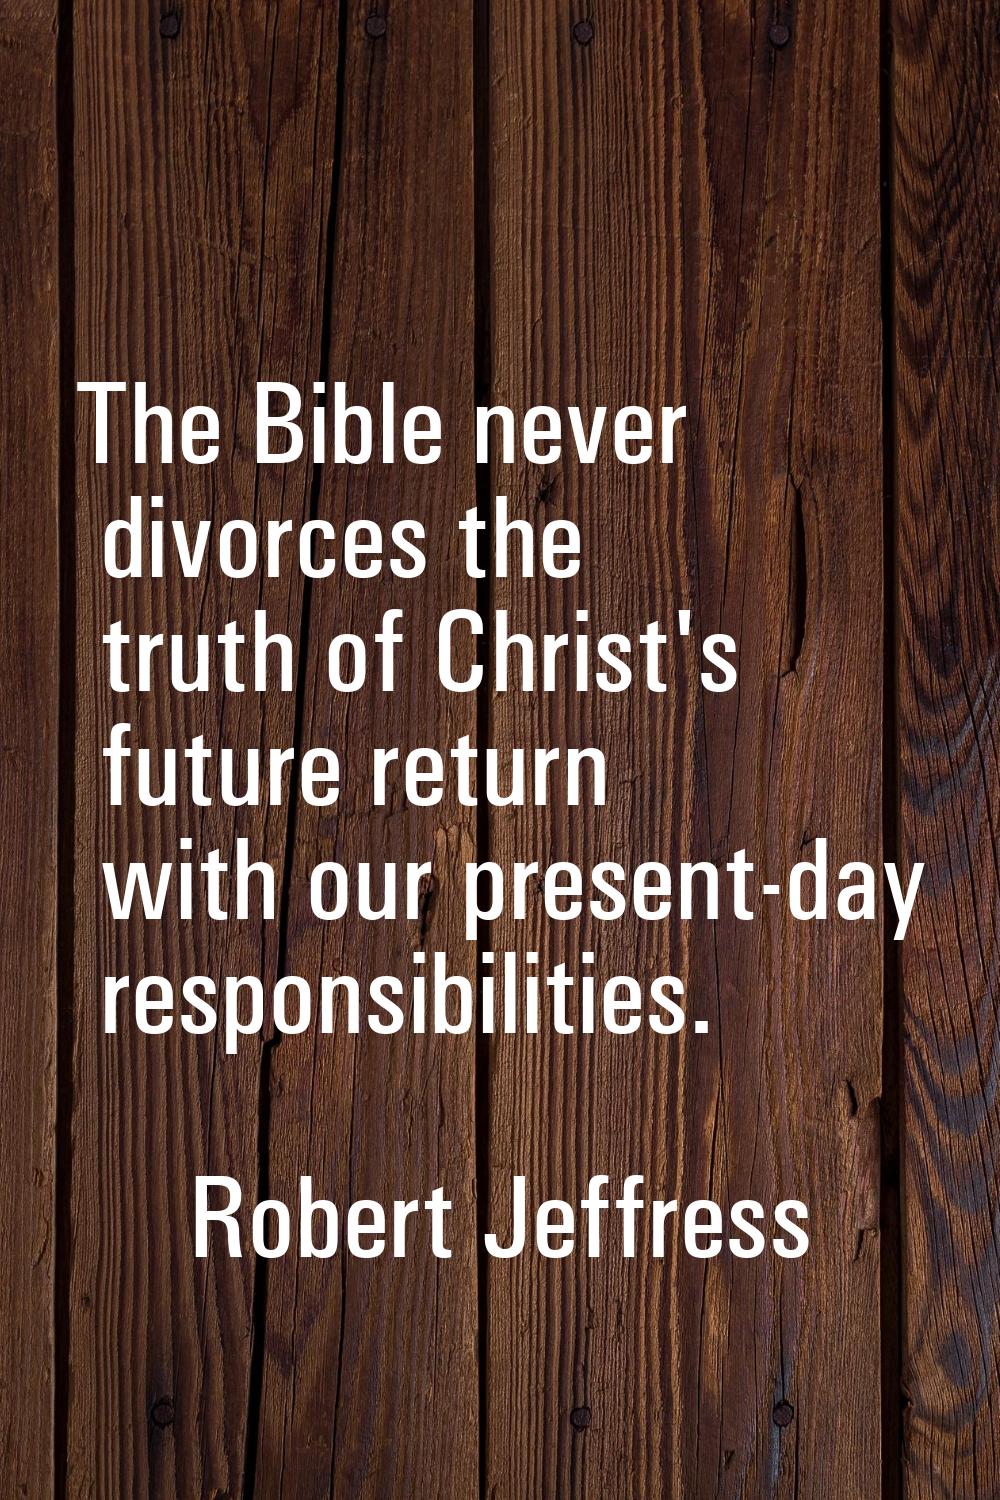 The Bible never divorces the truth of Christ's future return with our present-day responsibilities.